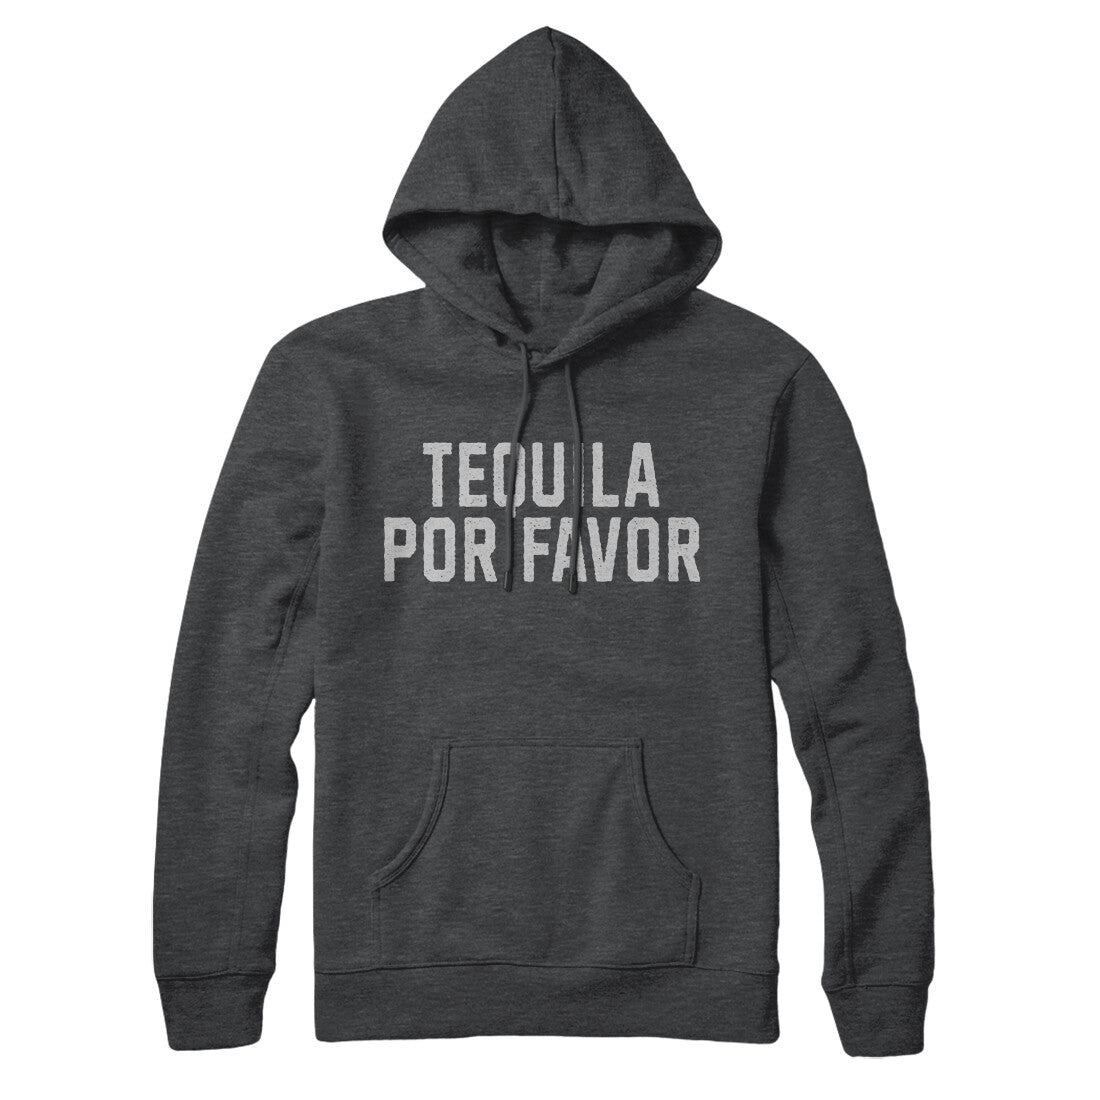 Tequila Por Favor in Charcoal Heather Color